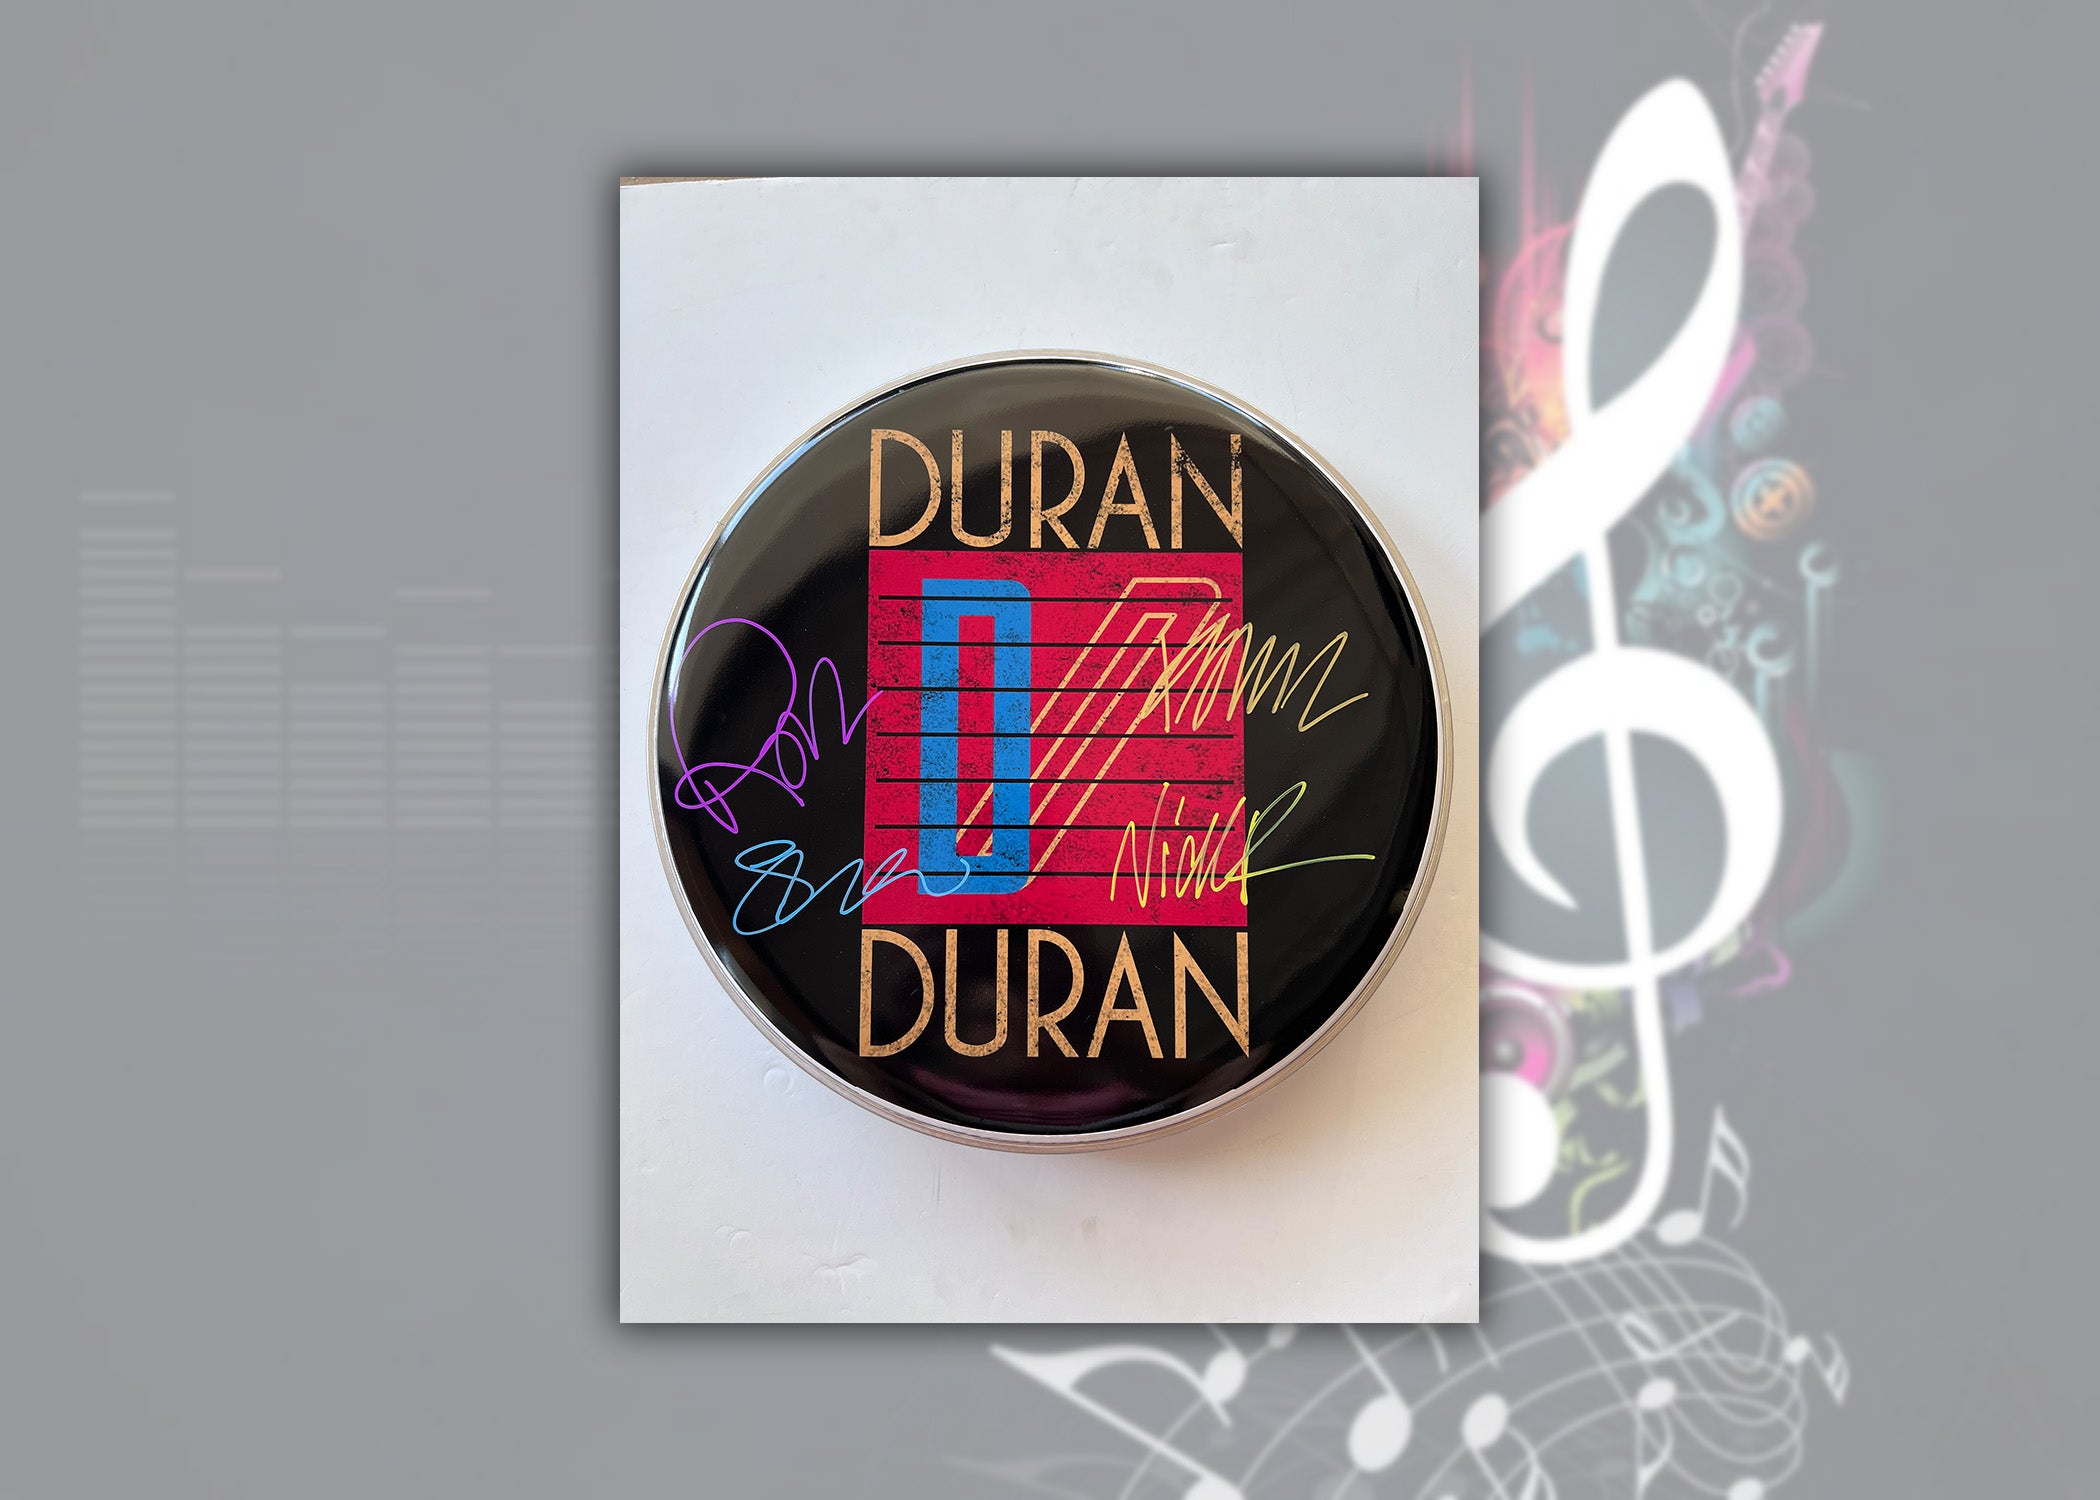 Duran Duran drumhead one-of-a-kind drumhead signed with proof